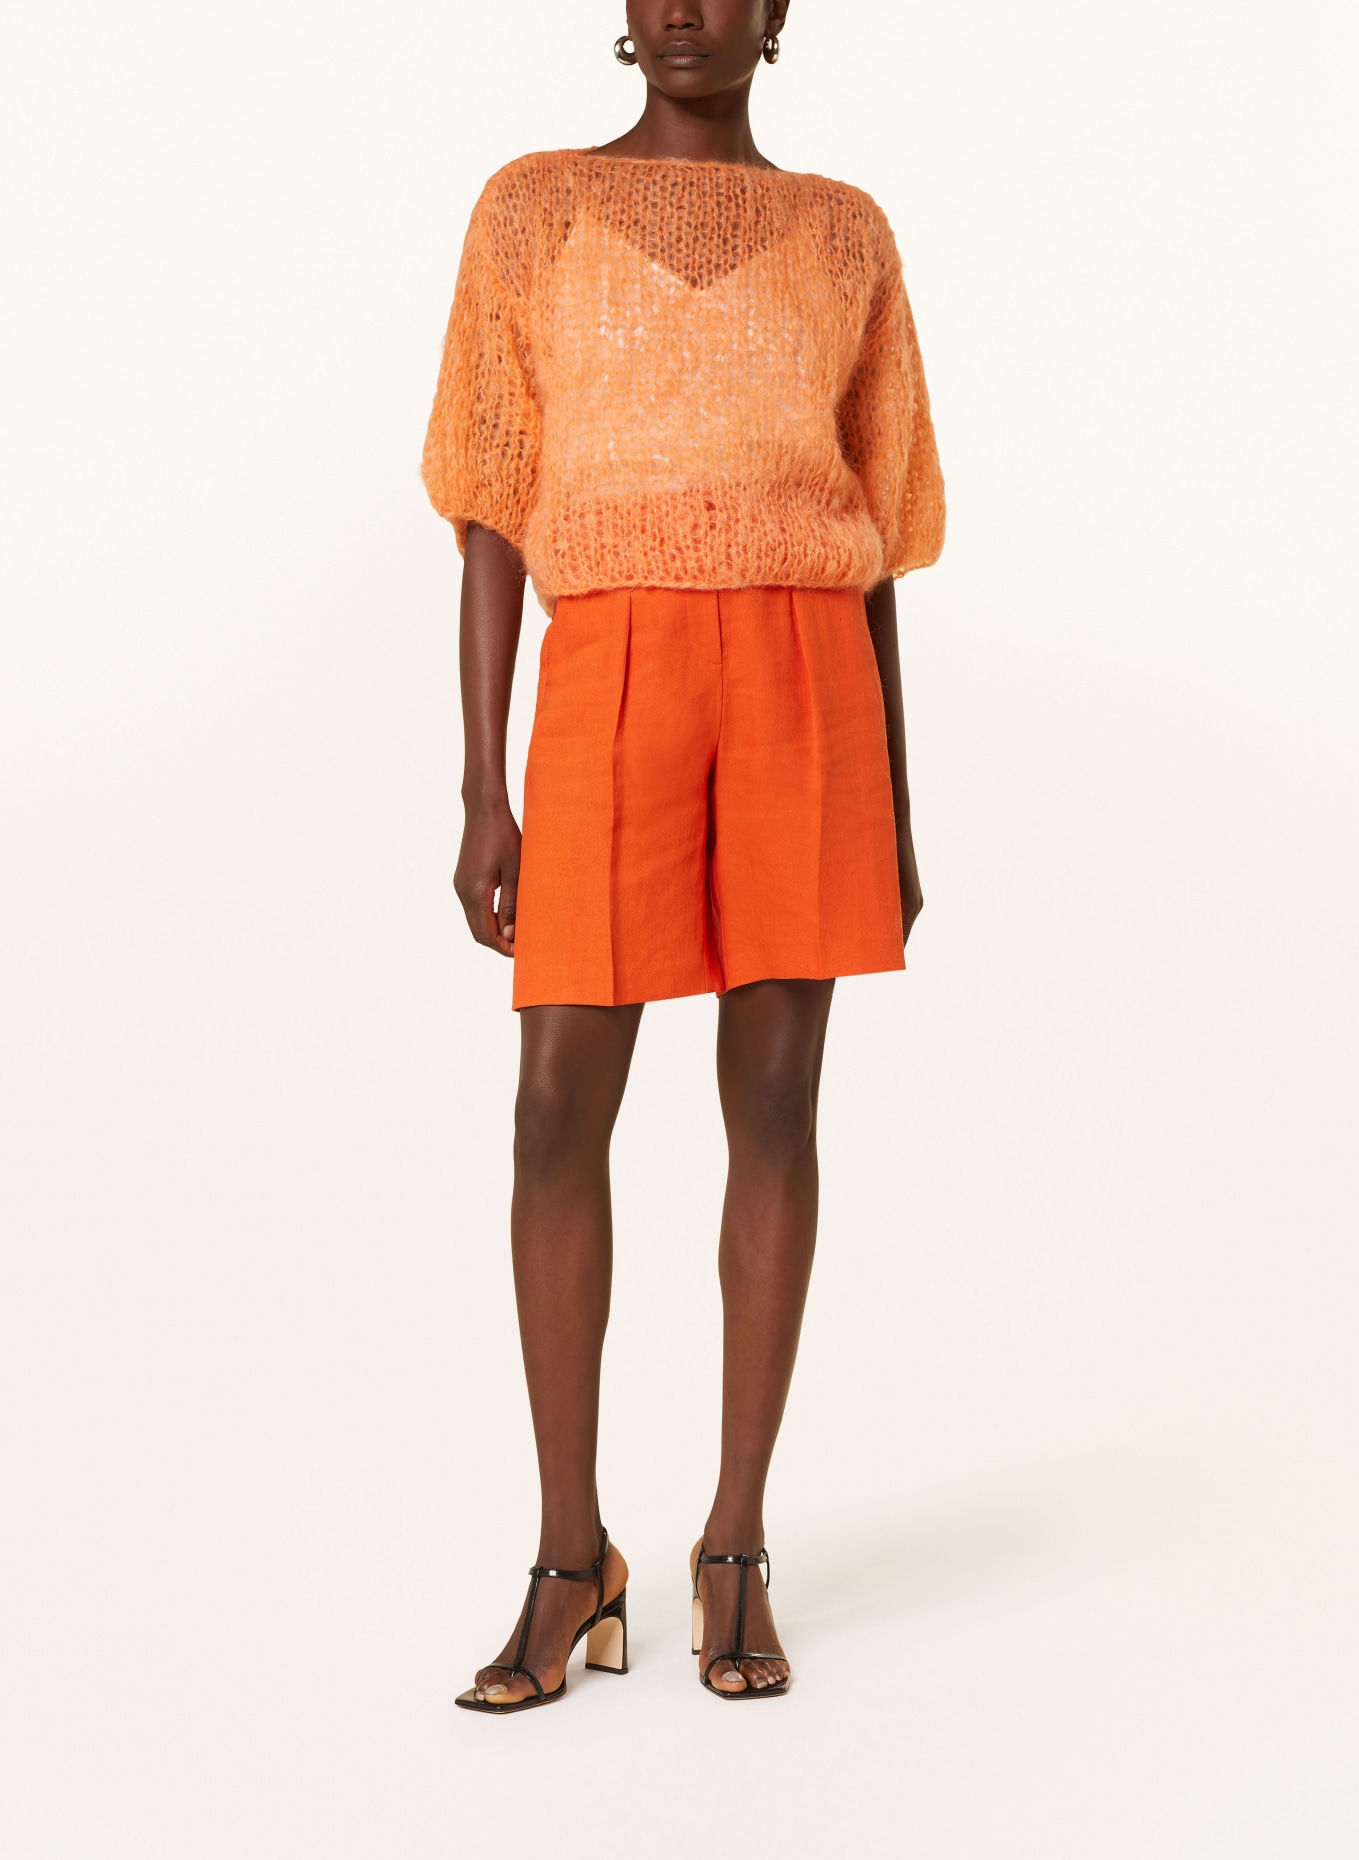 MAIAMI Mohair sweater with 3/4 sleeves, Color: ORANGE (Image 2)